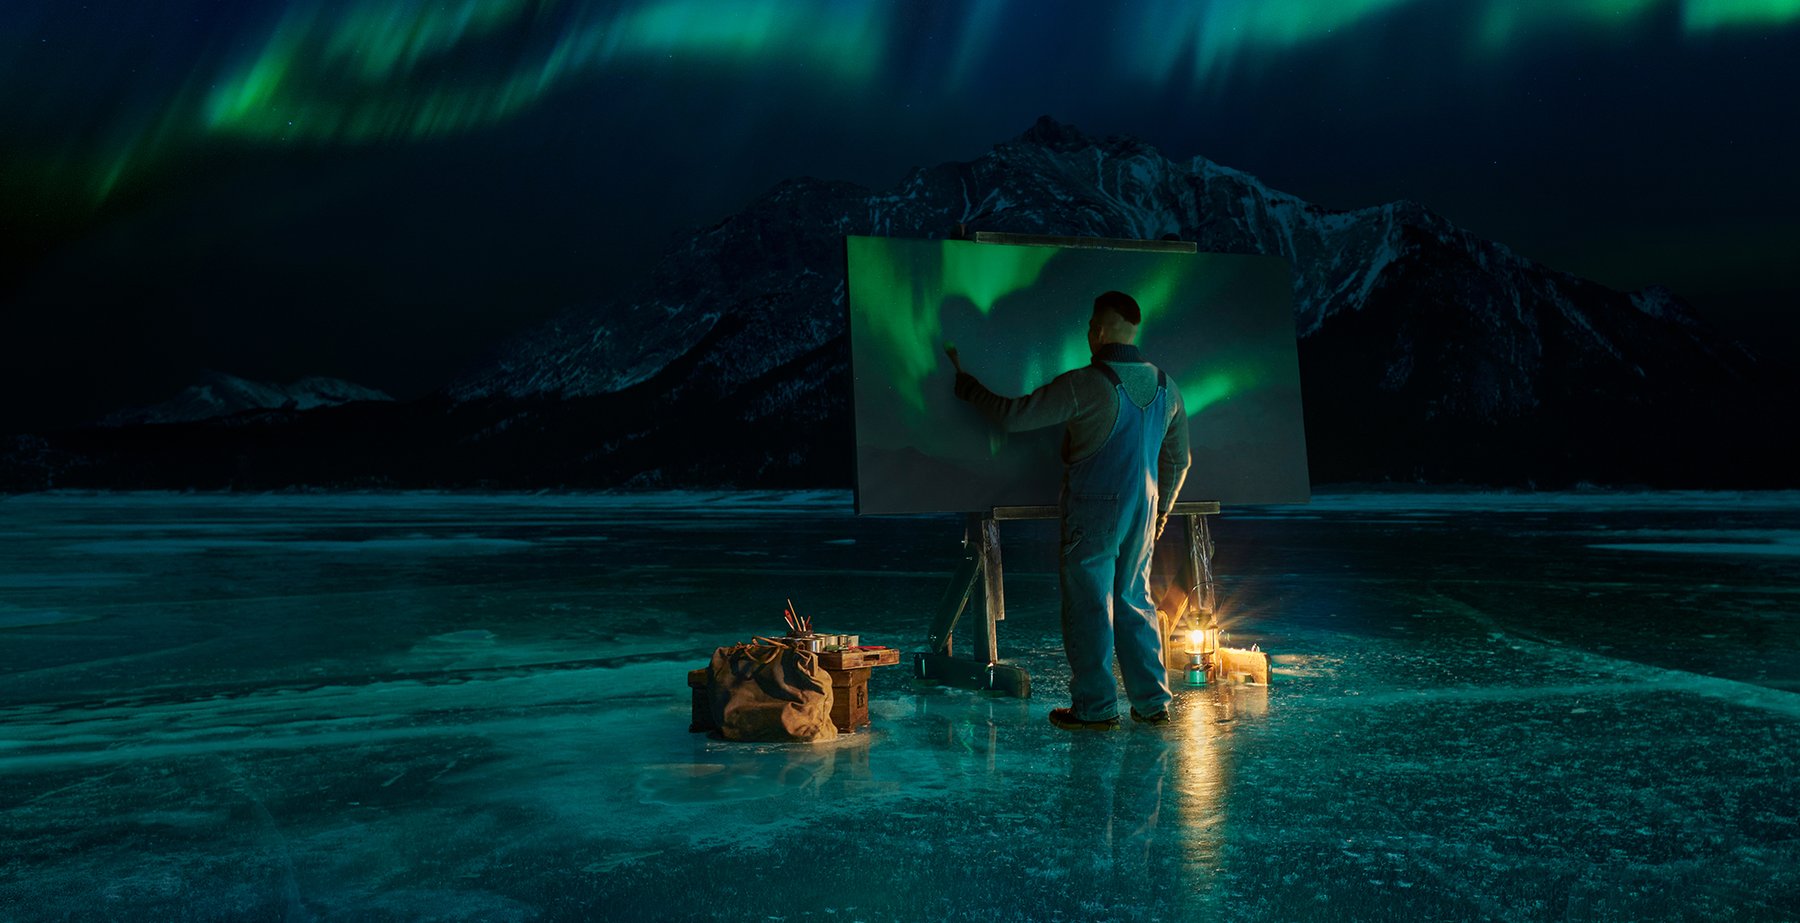 Man standing on frozen lake at night painting the Northern Lights on a large canvas with the Northern Lights overhead in the sky.